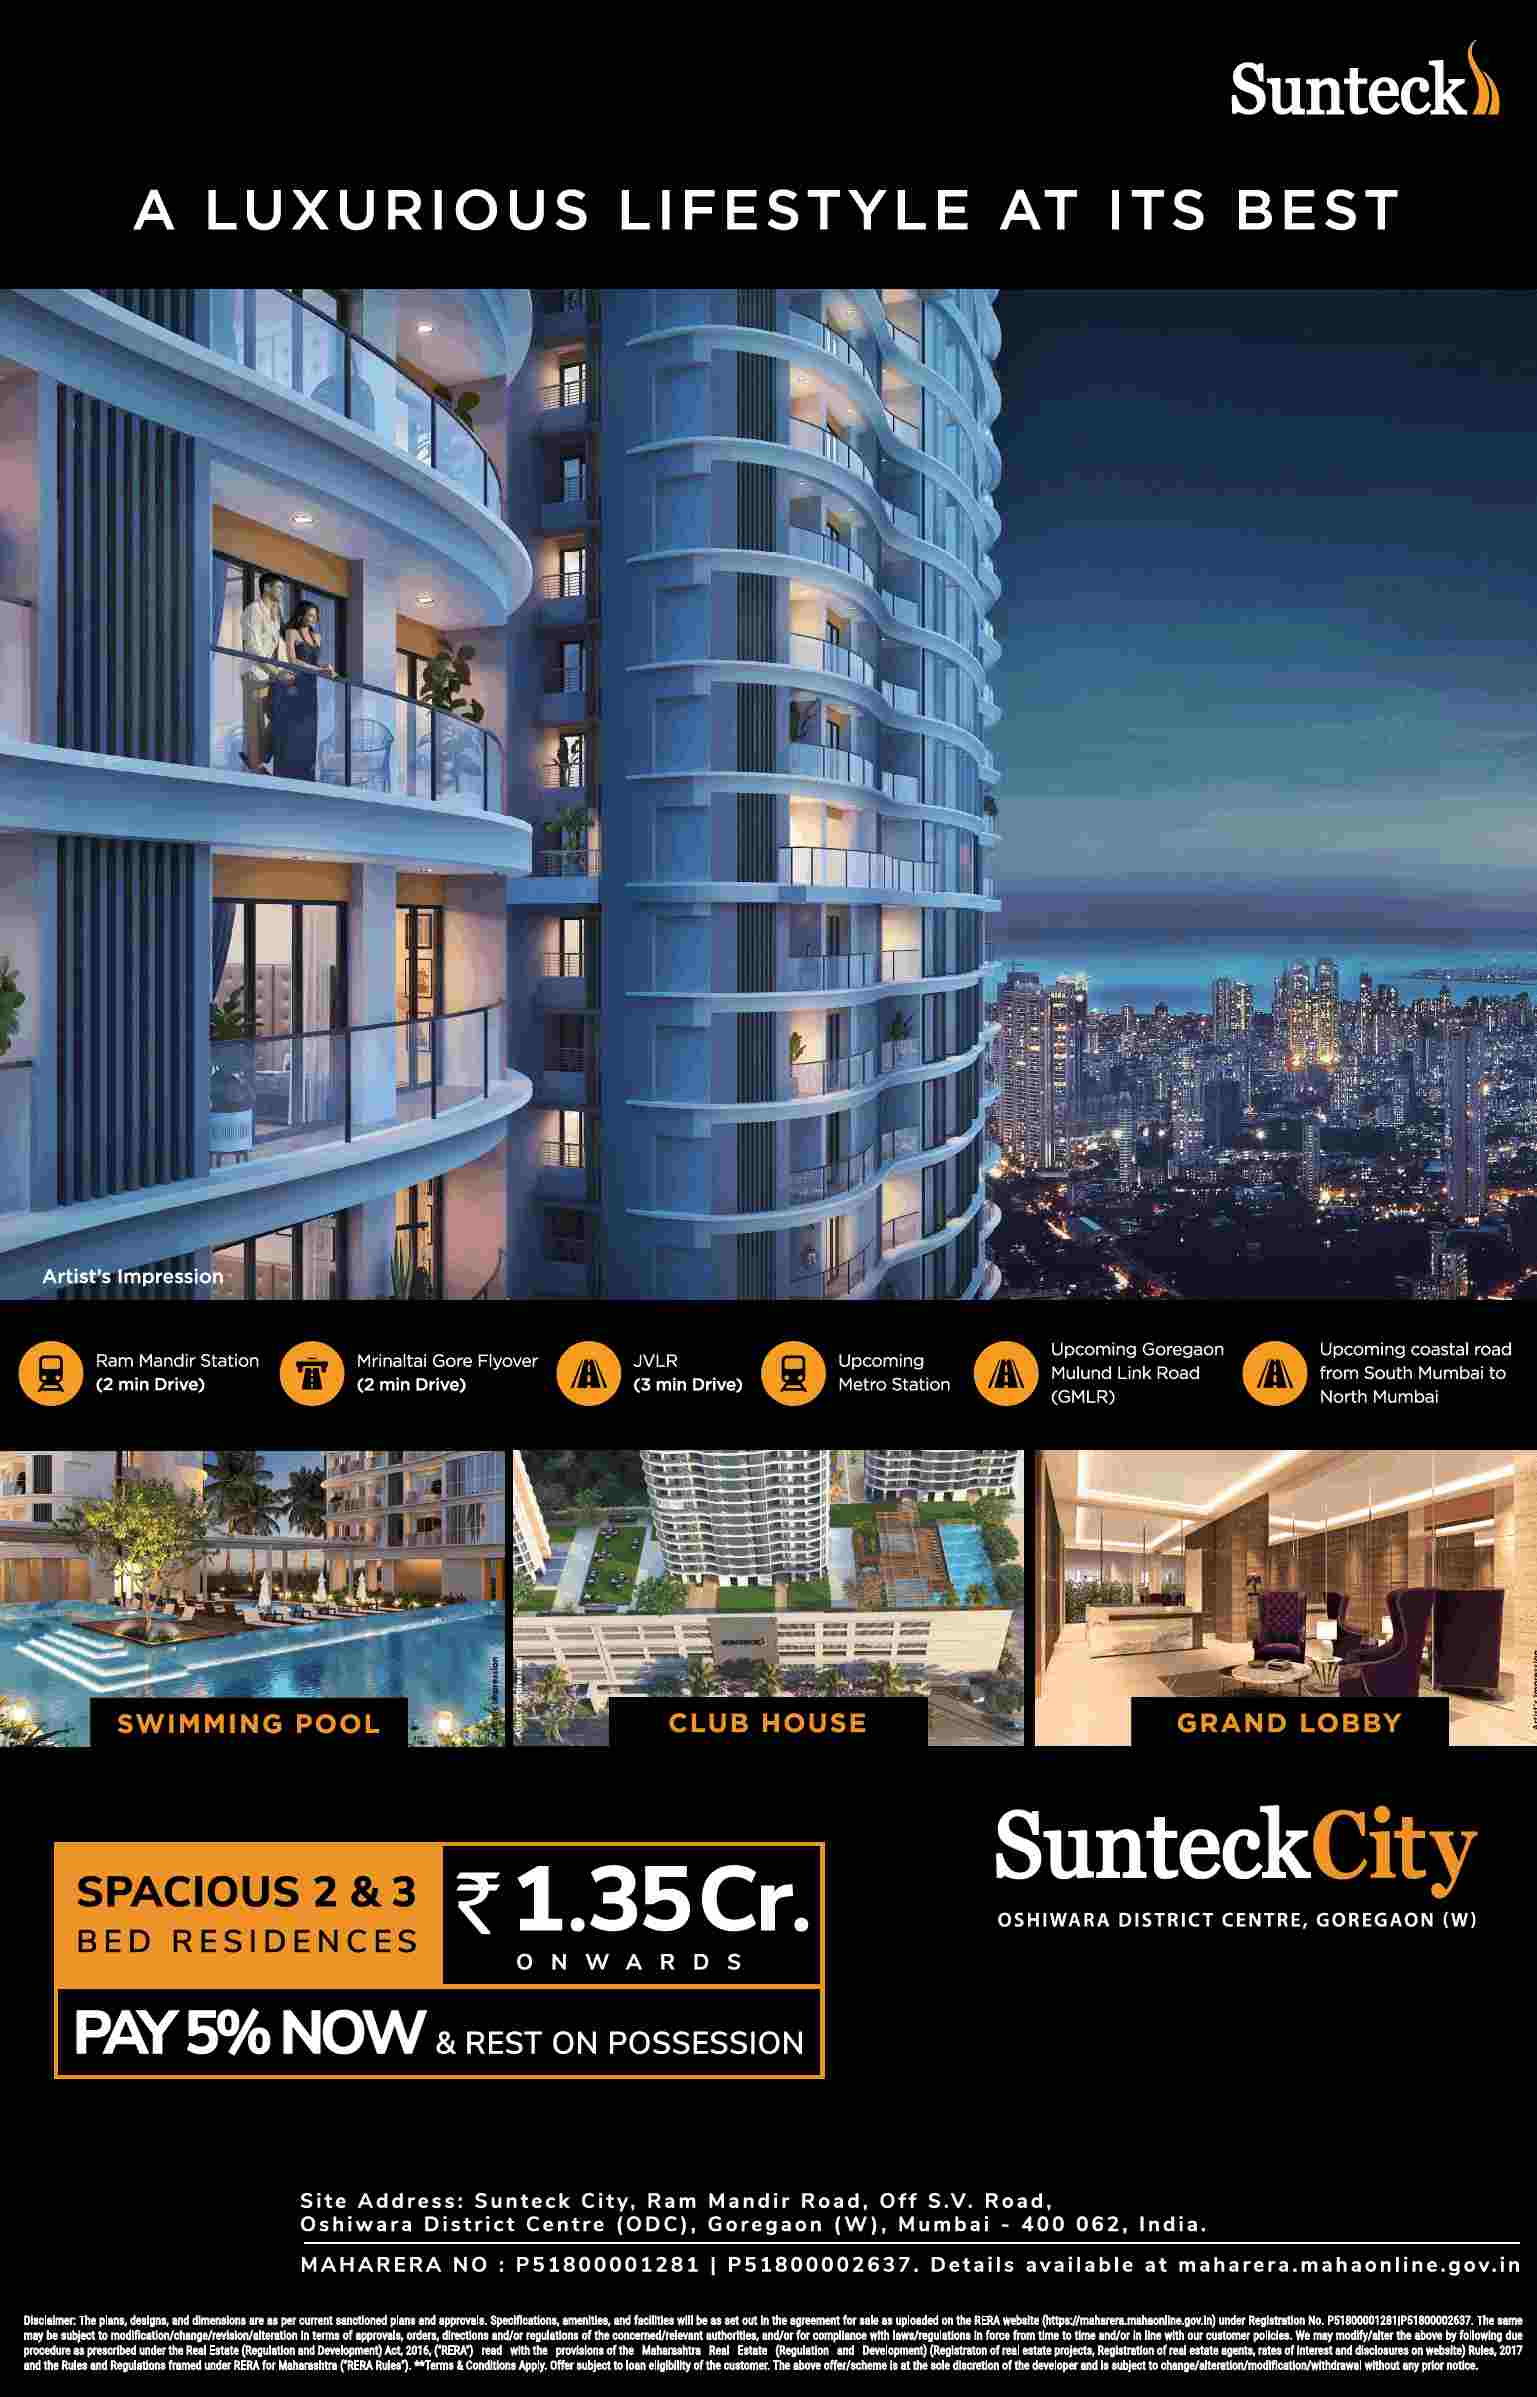 Pay 5% now and rest on possession at Sunteck City in Goregaon West, Mumbai Update